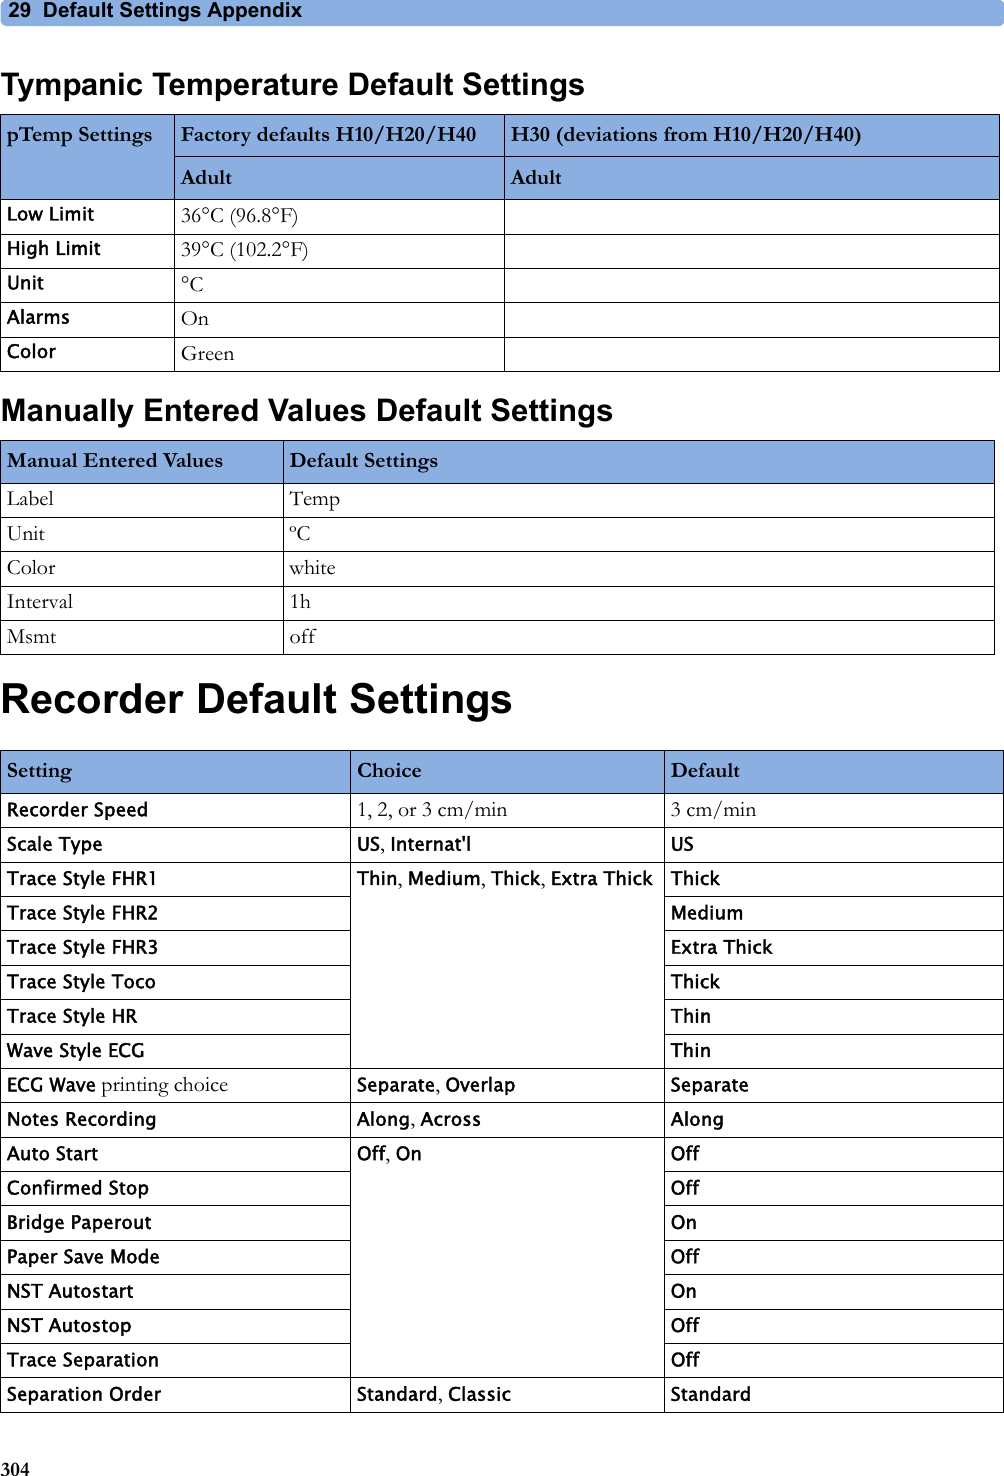 29 Default Settings Appendix304Tympanic Temperature Default SettingsManually Entered Values Default SettingsRecorder Default SettingspTemp Settings Factory defaults H10/H20/H40 H30 (deviations from H10/H20/H40)Adult AdultLow Limit 36°C (96.8°F)High Limit 39°C (102.2°F)Unit °CAlarms OnColor GreenManual Entered Values Default SettingsLabel TempUnit ºCColor whiteInterval 1hMsmt offSetting Choice DefaultRecorder Speed 1, 2, or 3 cm/min 3 cm/minScale Type US, Internat&apos;l USTrace Style FHR1 Thin, Medium, Thick, Extra Thick ThickTrace Style FHR2 MediumTrace Style FHR3 Extra ThickTrace Style Toco ThickTrace Style HR ThinWave Style ECG ThinECG Wave printing choice Separate, Overlap SeparateNotes Recording Along, Across AlongAuto Start Off, On OffConfirmed Stop OffBridge Paperout OnPaper Save Mode OffNST Autostart OnNST Autostop OffTrace Separation OffSeparation Order Standard, Classic Standard